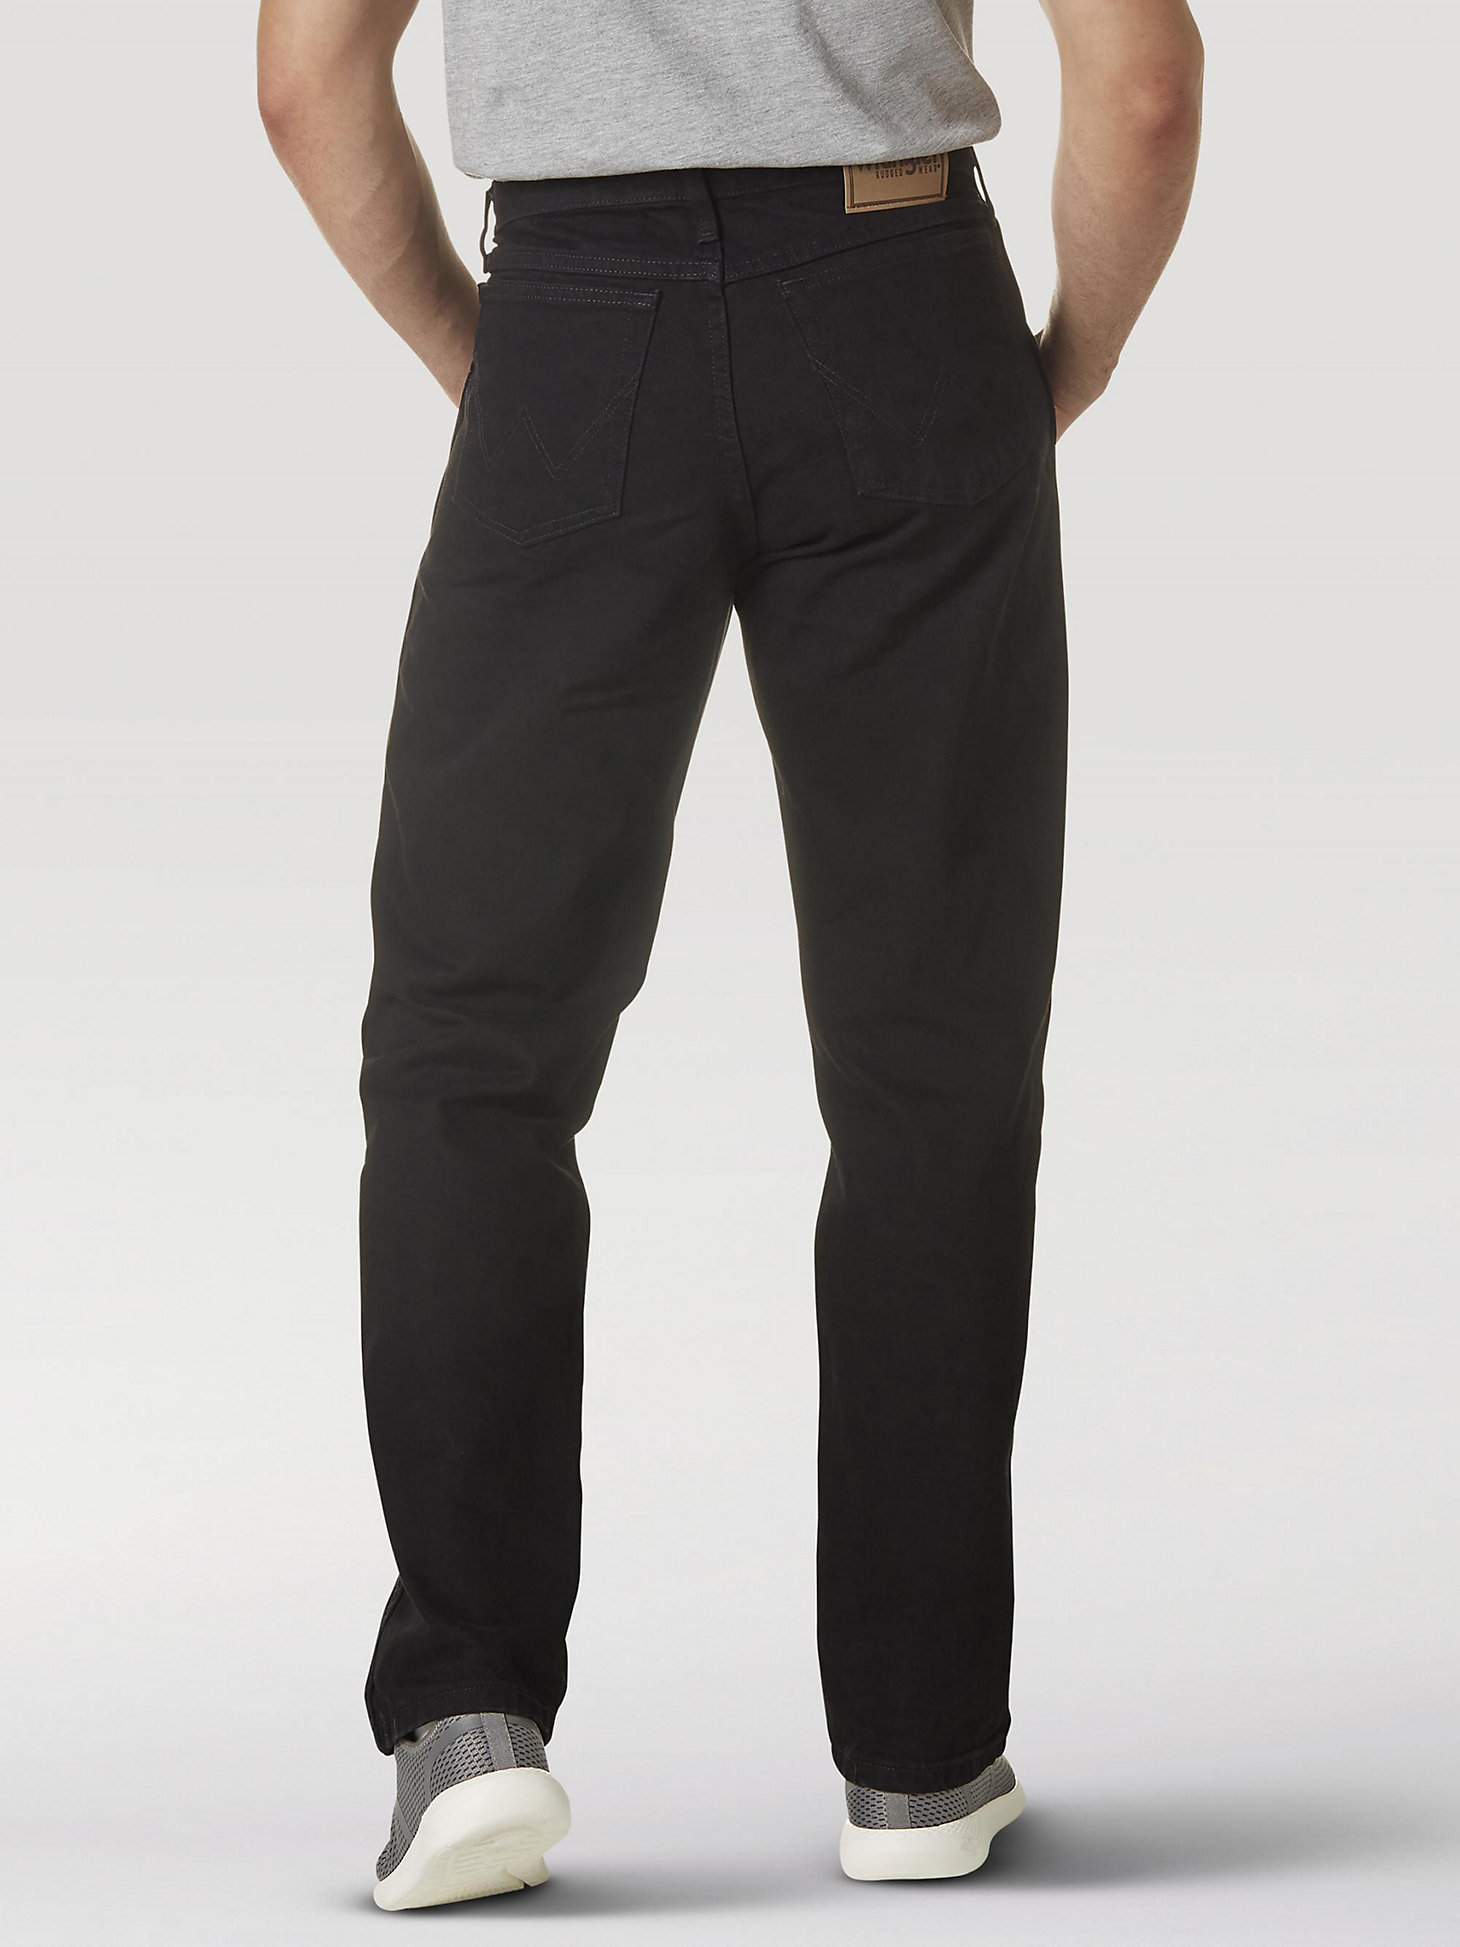 Wrangler Rugged Wear® Relaxed Fit Jean in Black alternative view 3